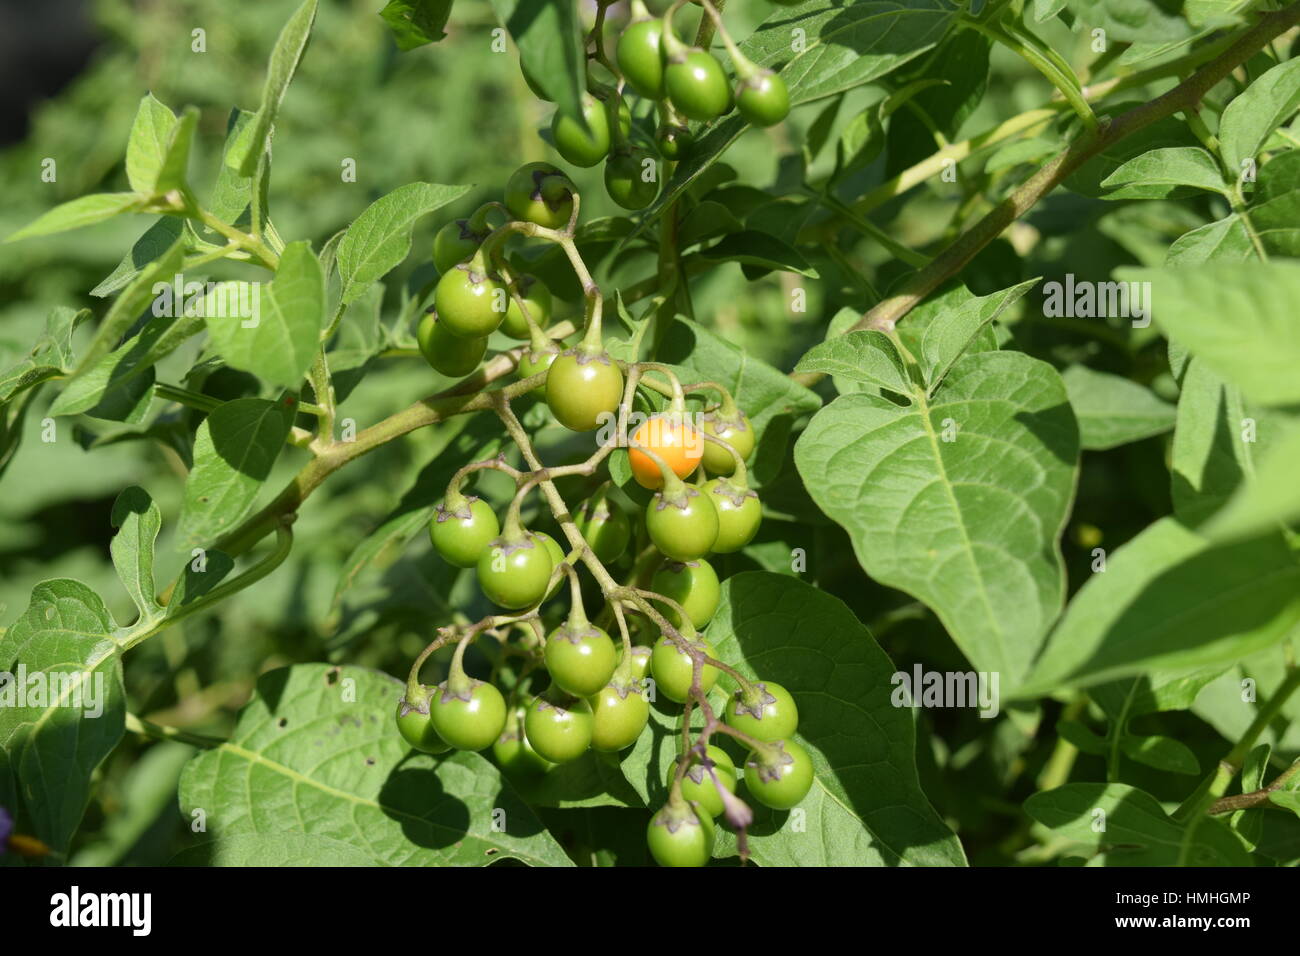 Unripe fruit of the toxic and Invasive Bittersweet Nightshade vine. It is also known as Solanum dulcamara, Fellenwort, snake berry and many other names. Stock Photo